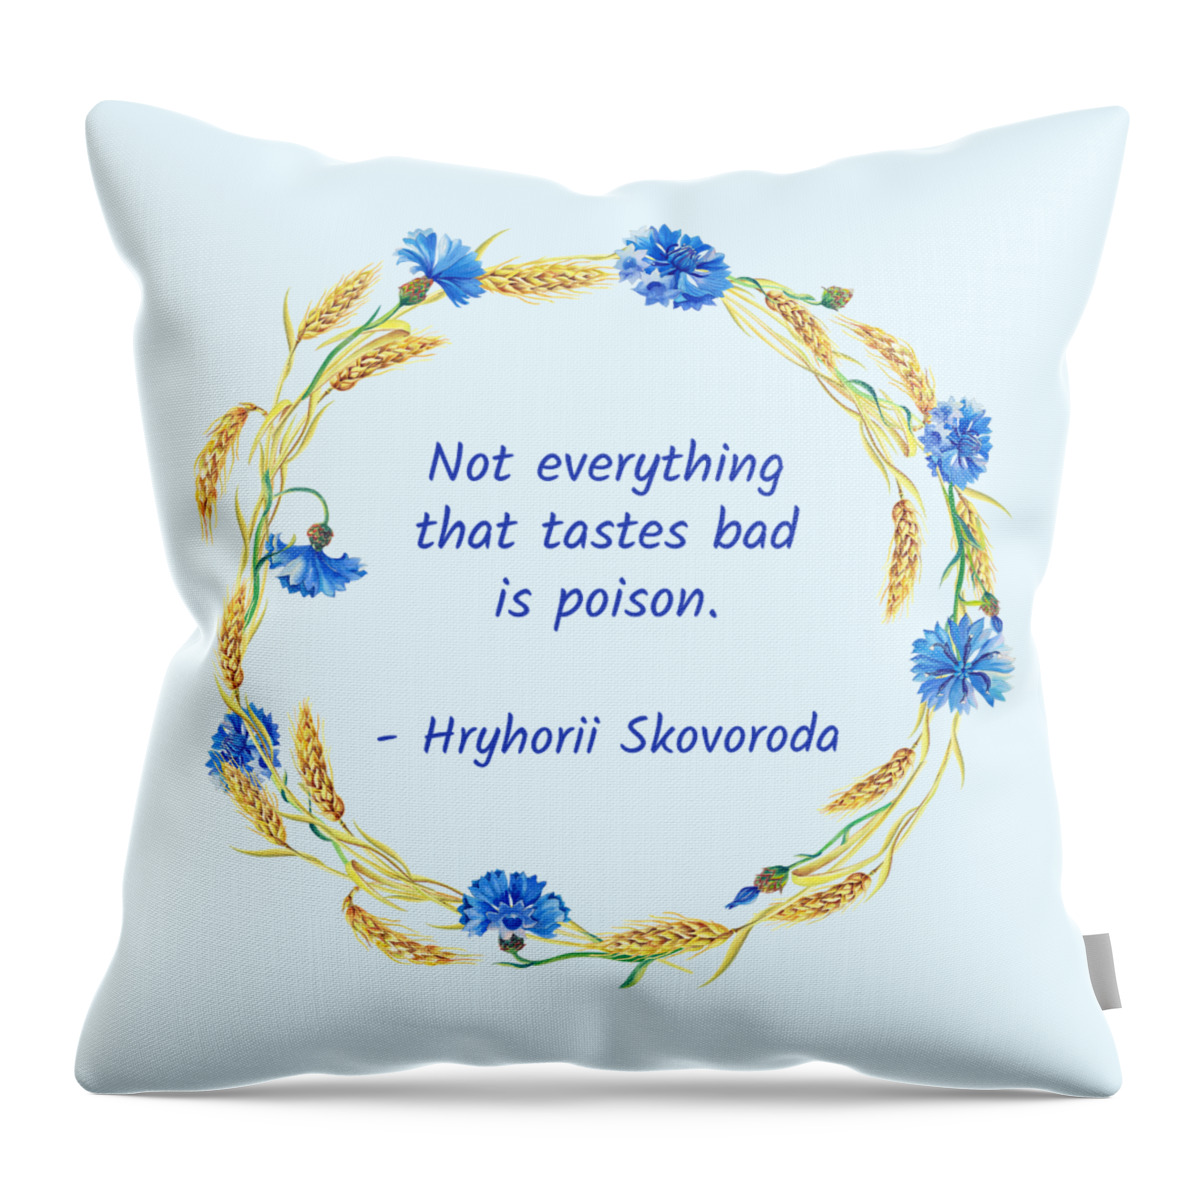 Skovoroda Throw Pillow featuring the digital art Not everything that tastes bad is poison by Alex Mir